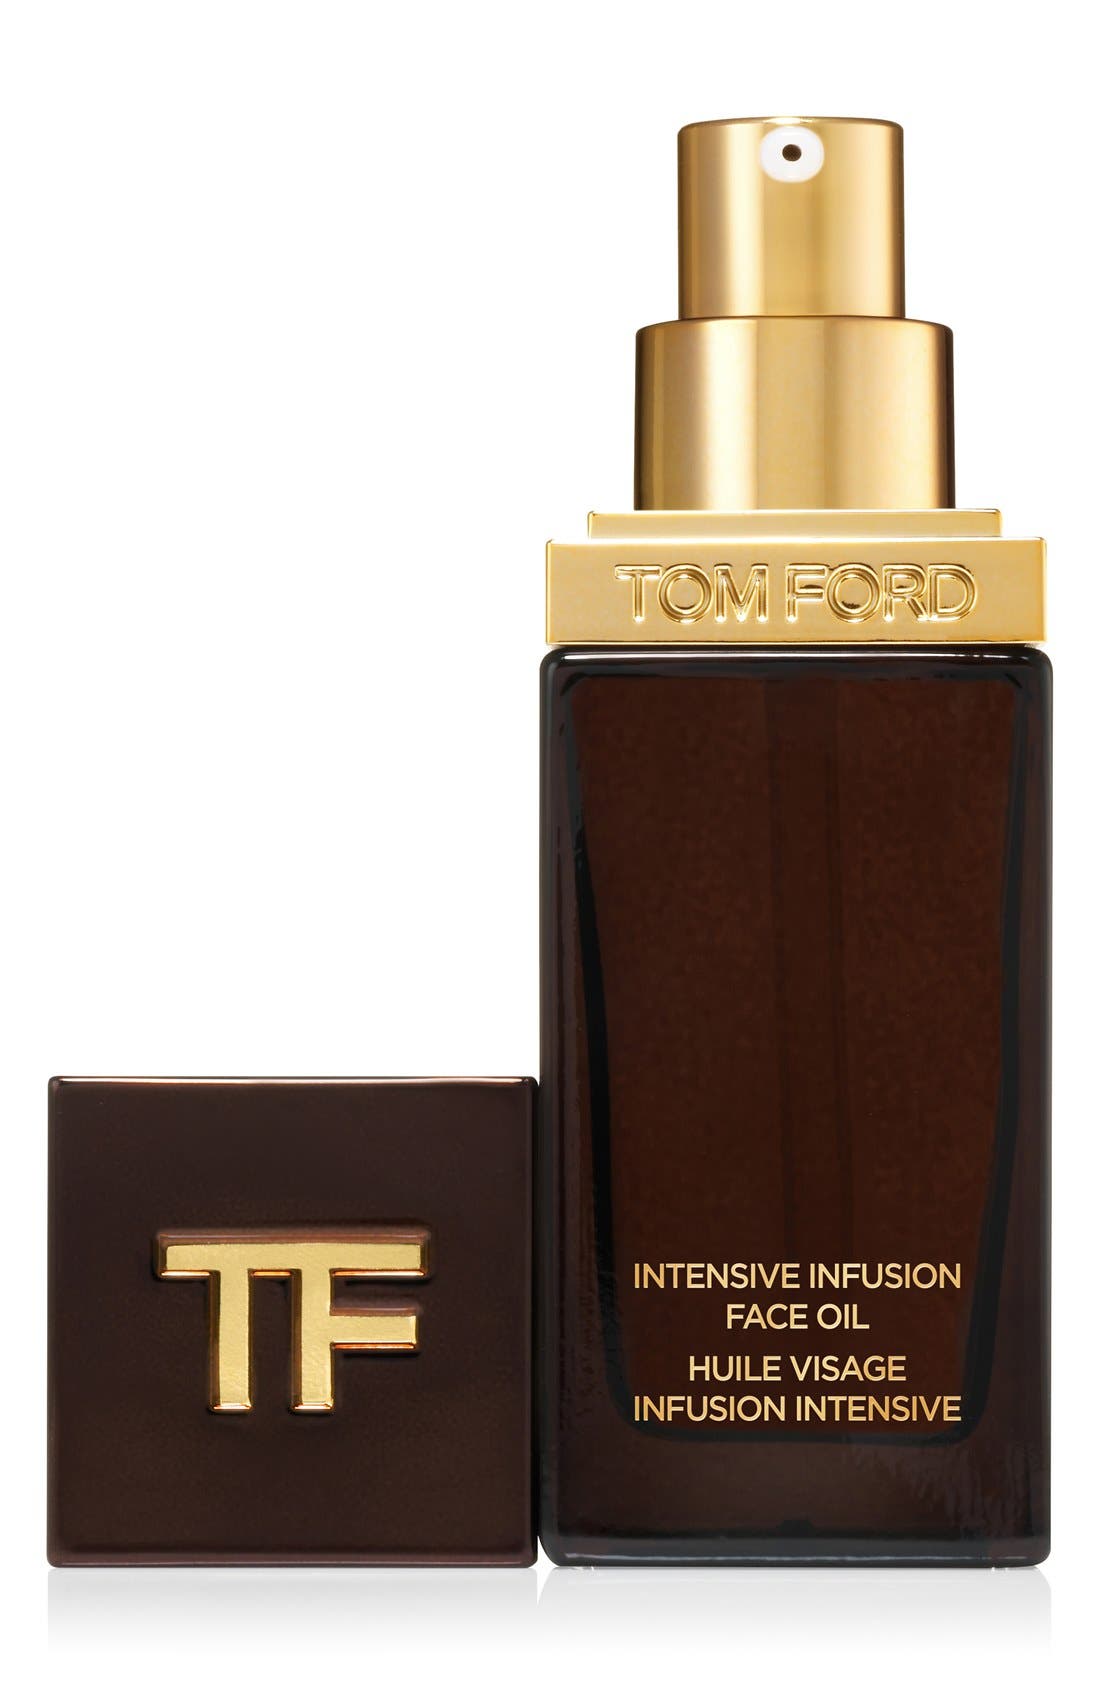 UPC 888066054379 product image for Tom Ford Intensive Infusion Face Oil at Nordstrom | upcitemdb.com